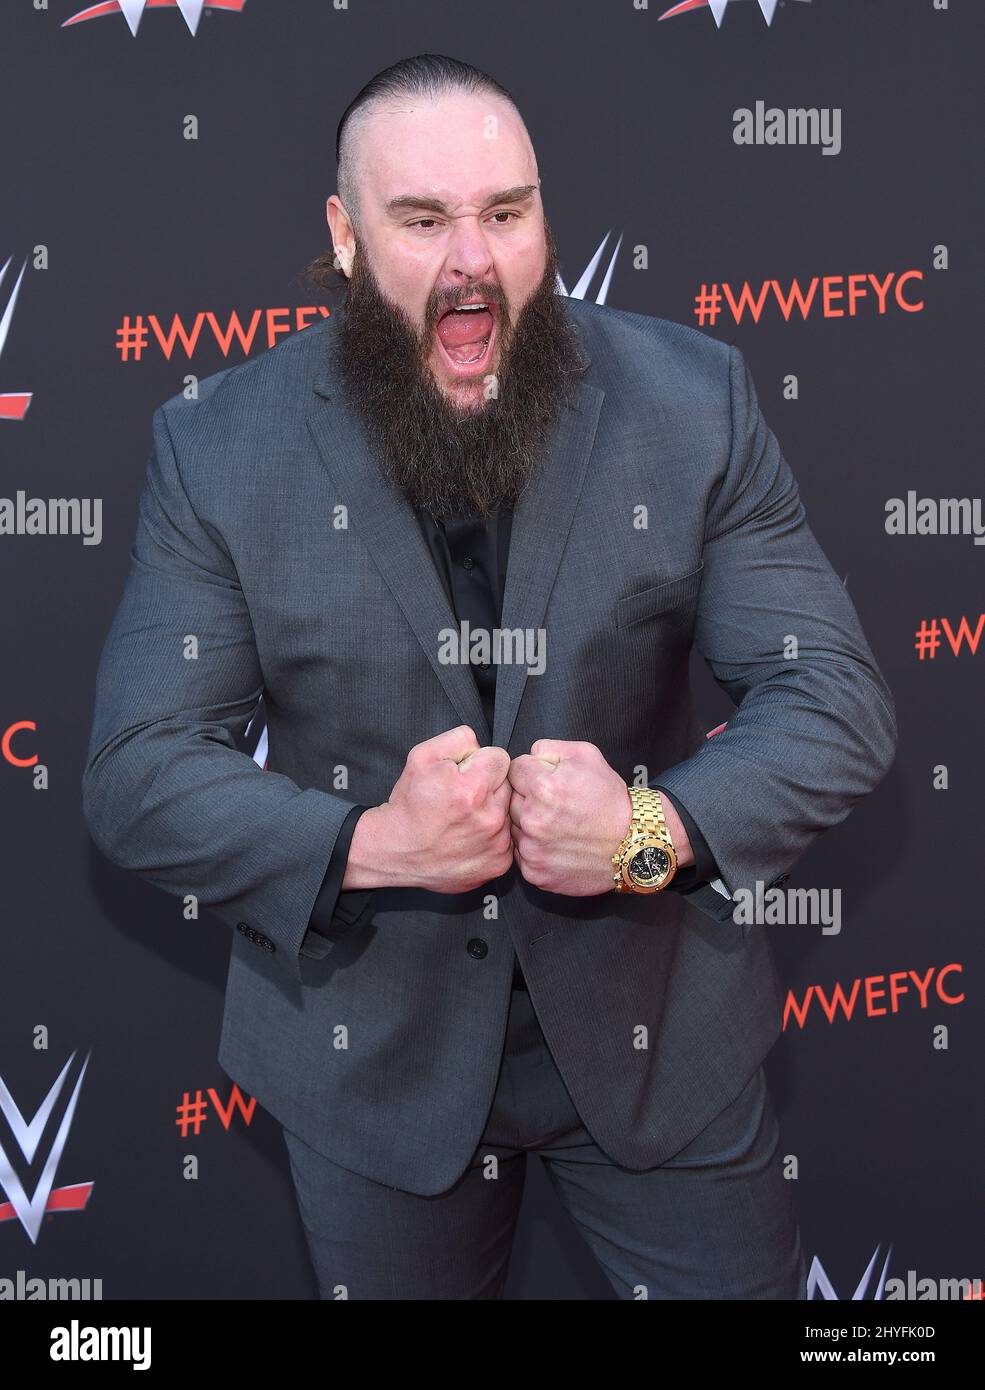 Braun Strowman at the 'WWE' FYC Event event at TV Academy Saban Media Center on June 6, 2018 in North Hollywood, CA. Stock Photo